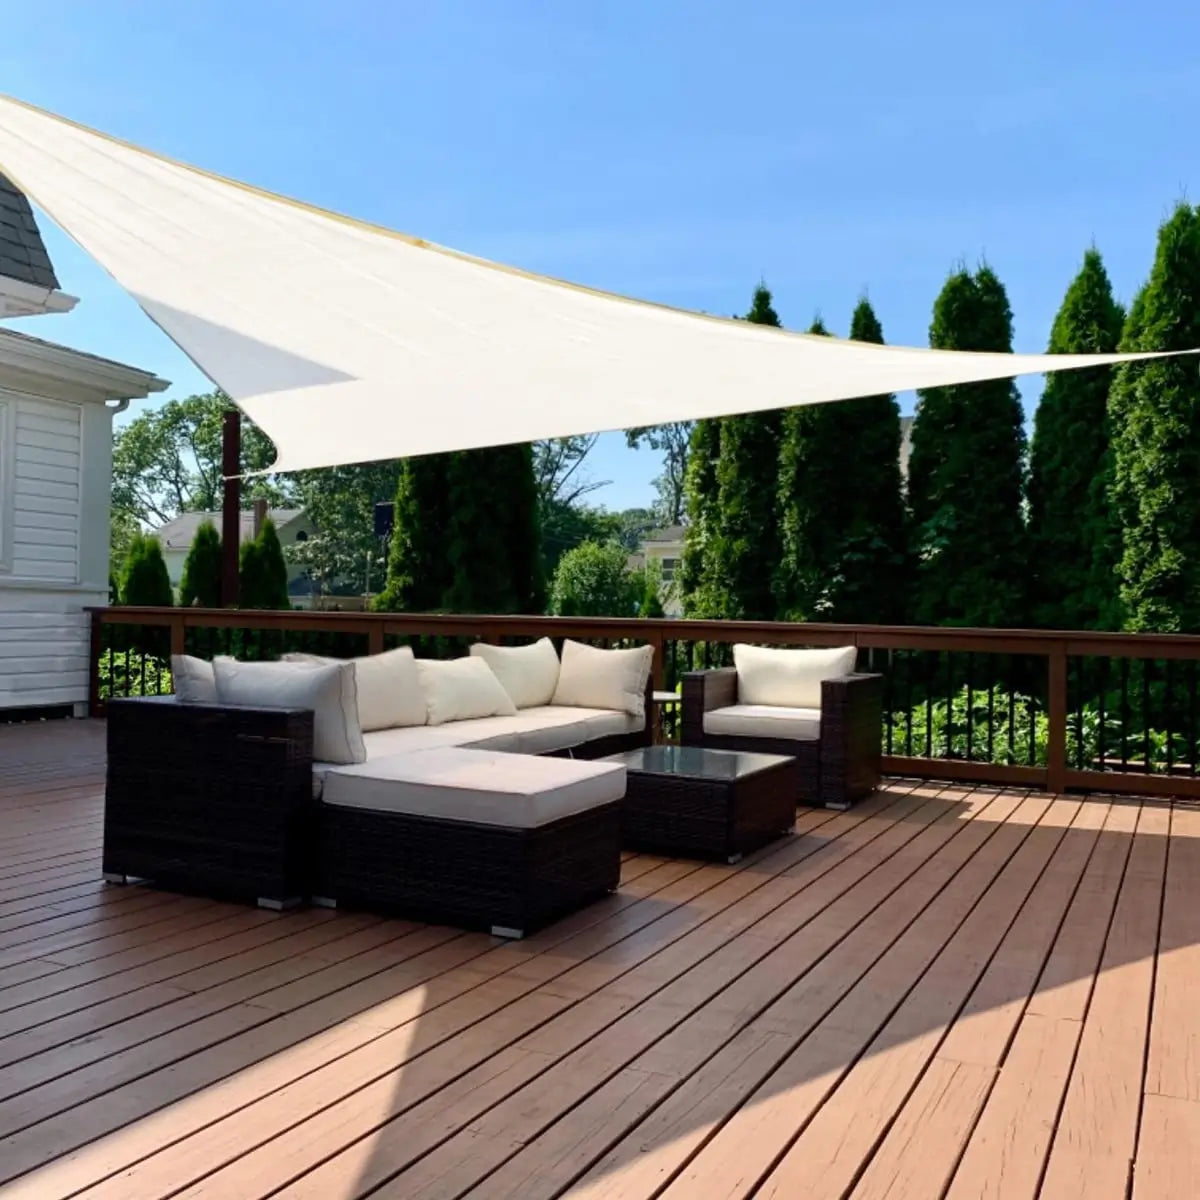 White triangle shade sail for deck